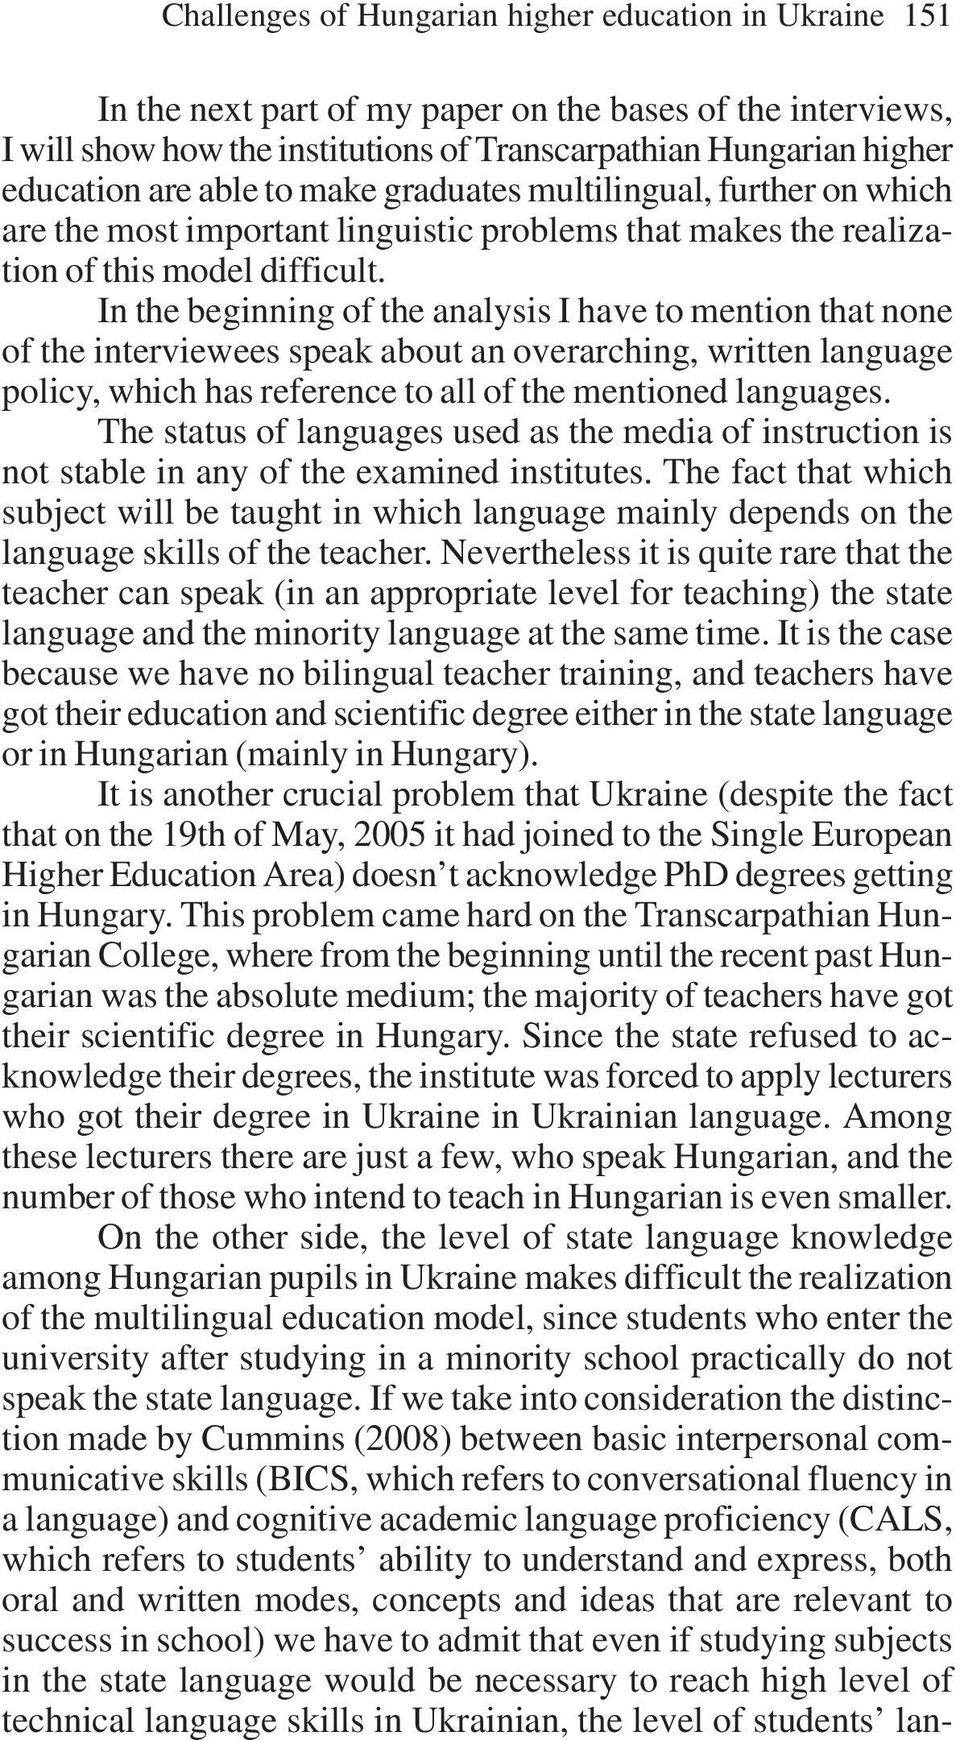 In the beginning of the analysis I have to mention that none of the interviewees speak about an overarching, written language policy, which has reference to all of the mentioned languages.